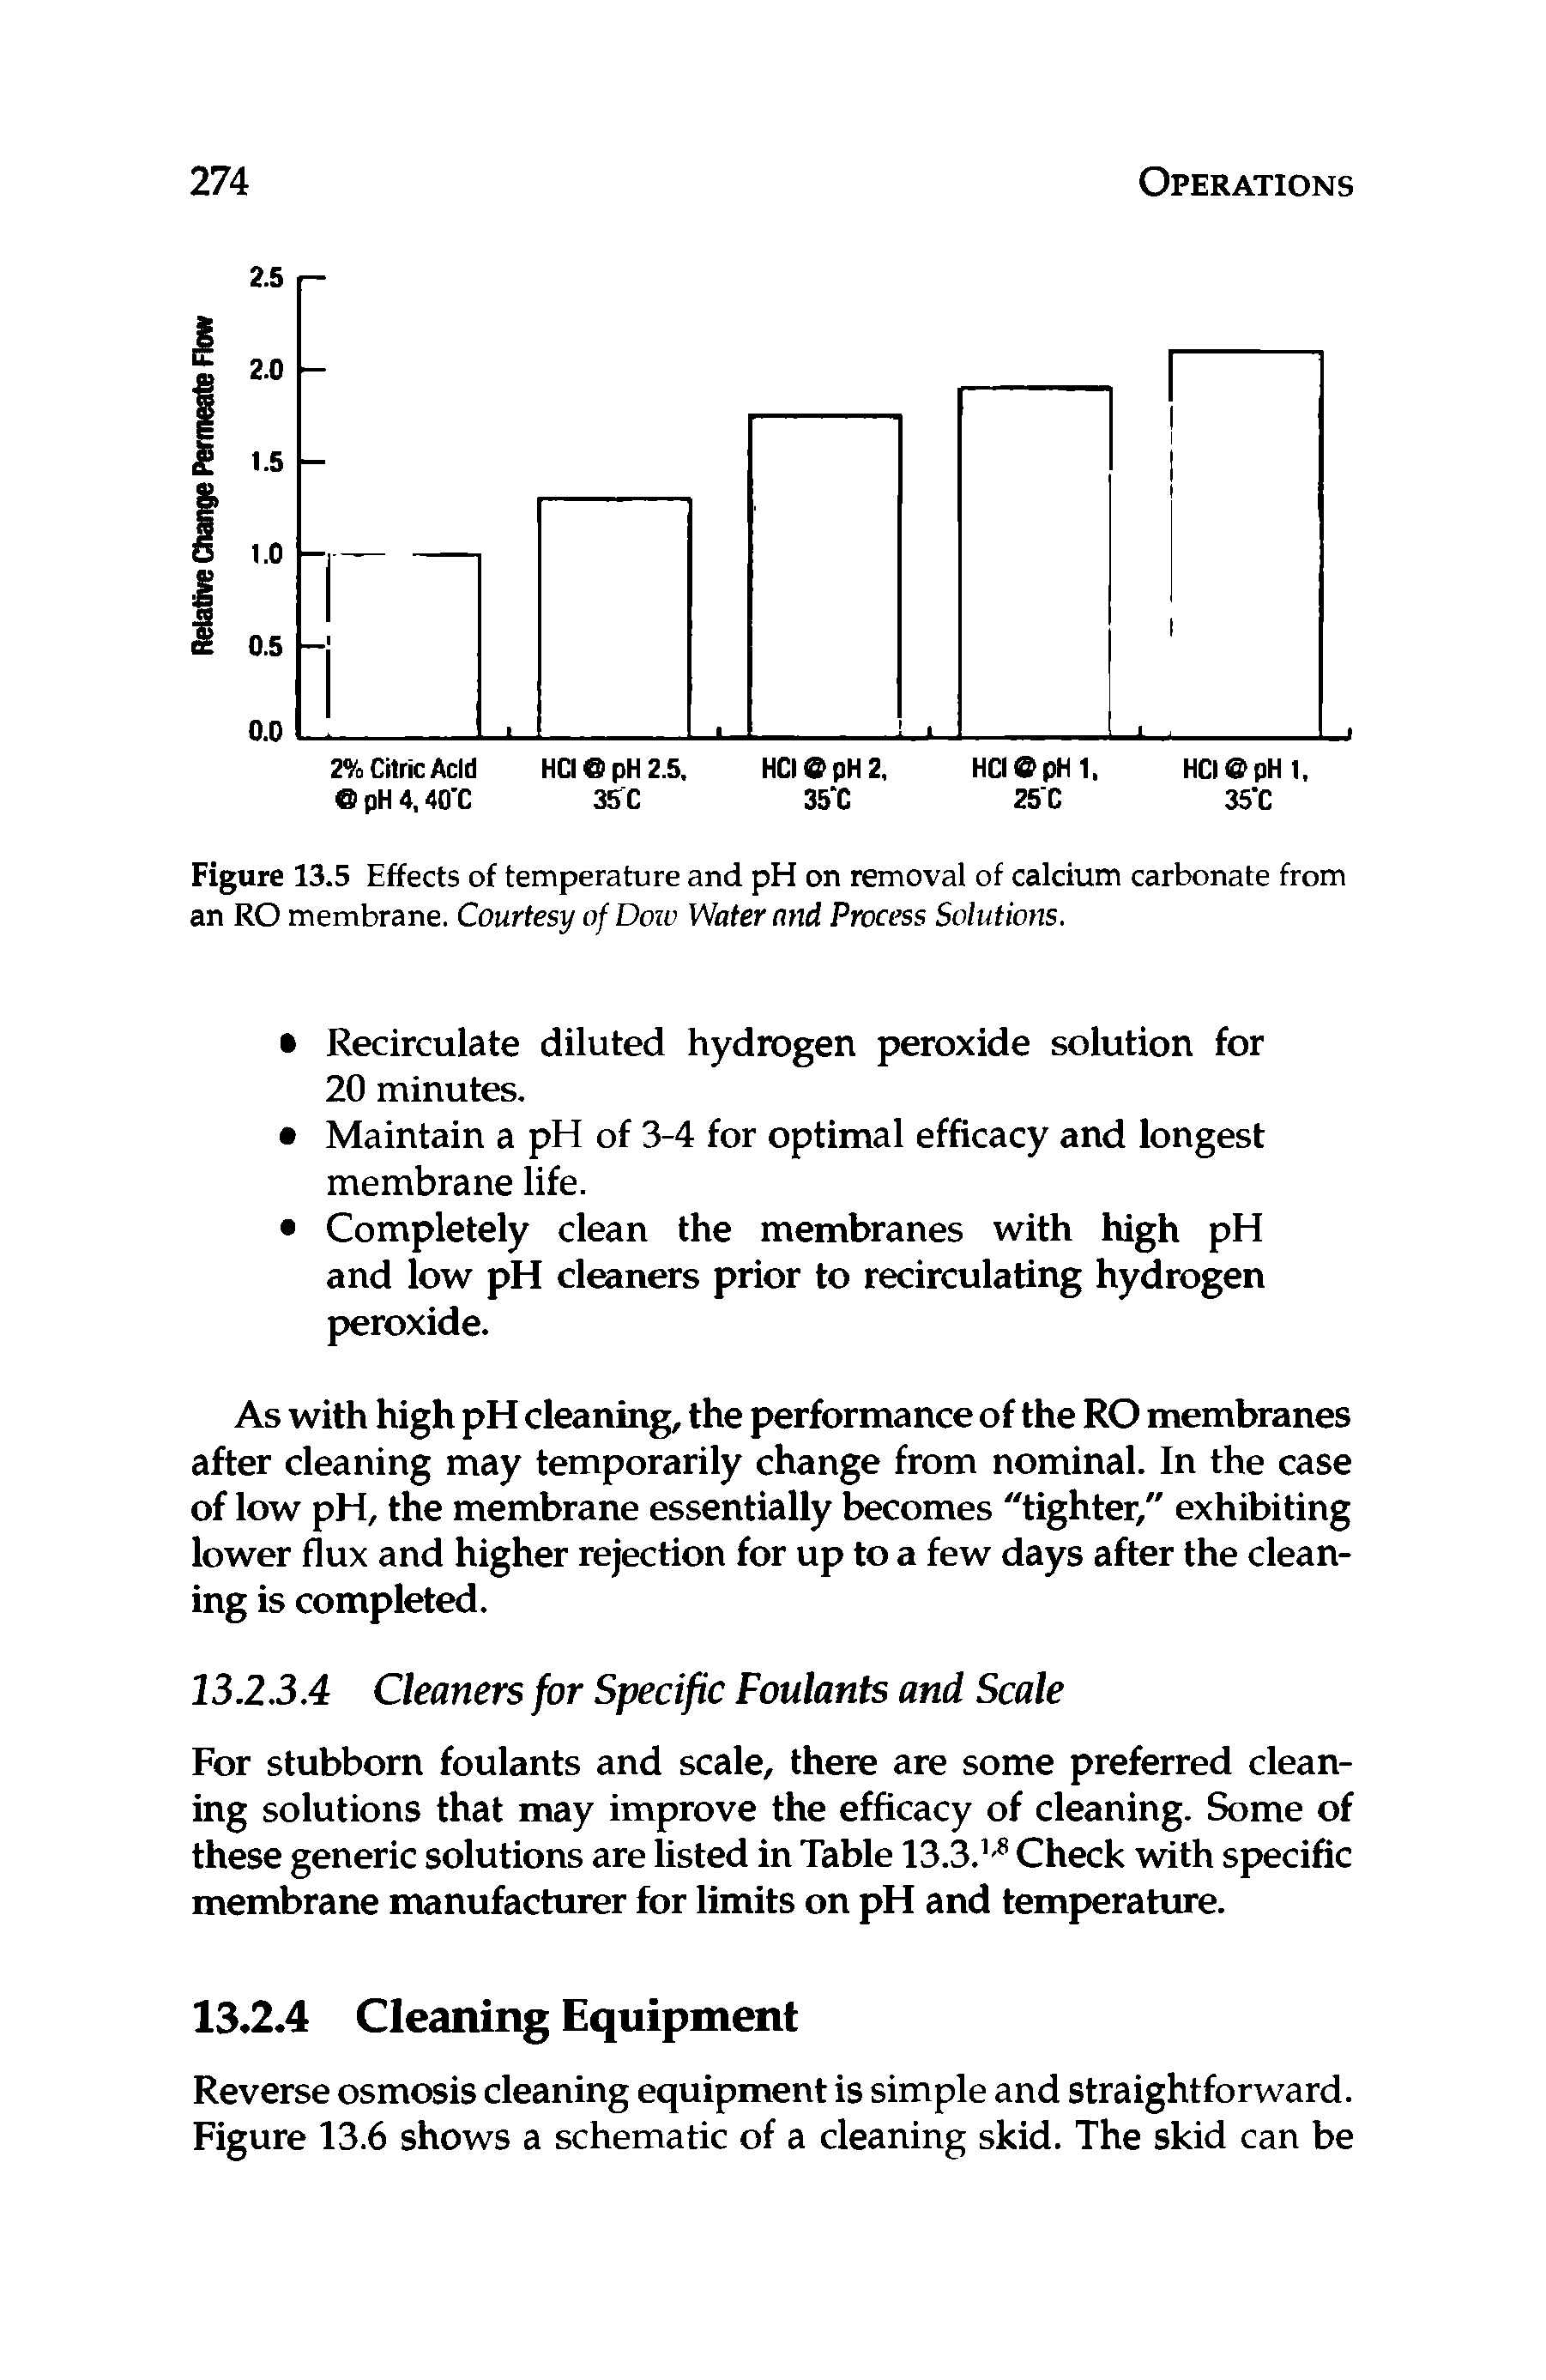 Figure 13.5 Effects of temperature and pH on removal of calcium carbonate from an RO membrane. Courtesy of Dow Water and Process Solutions.